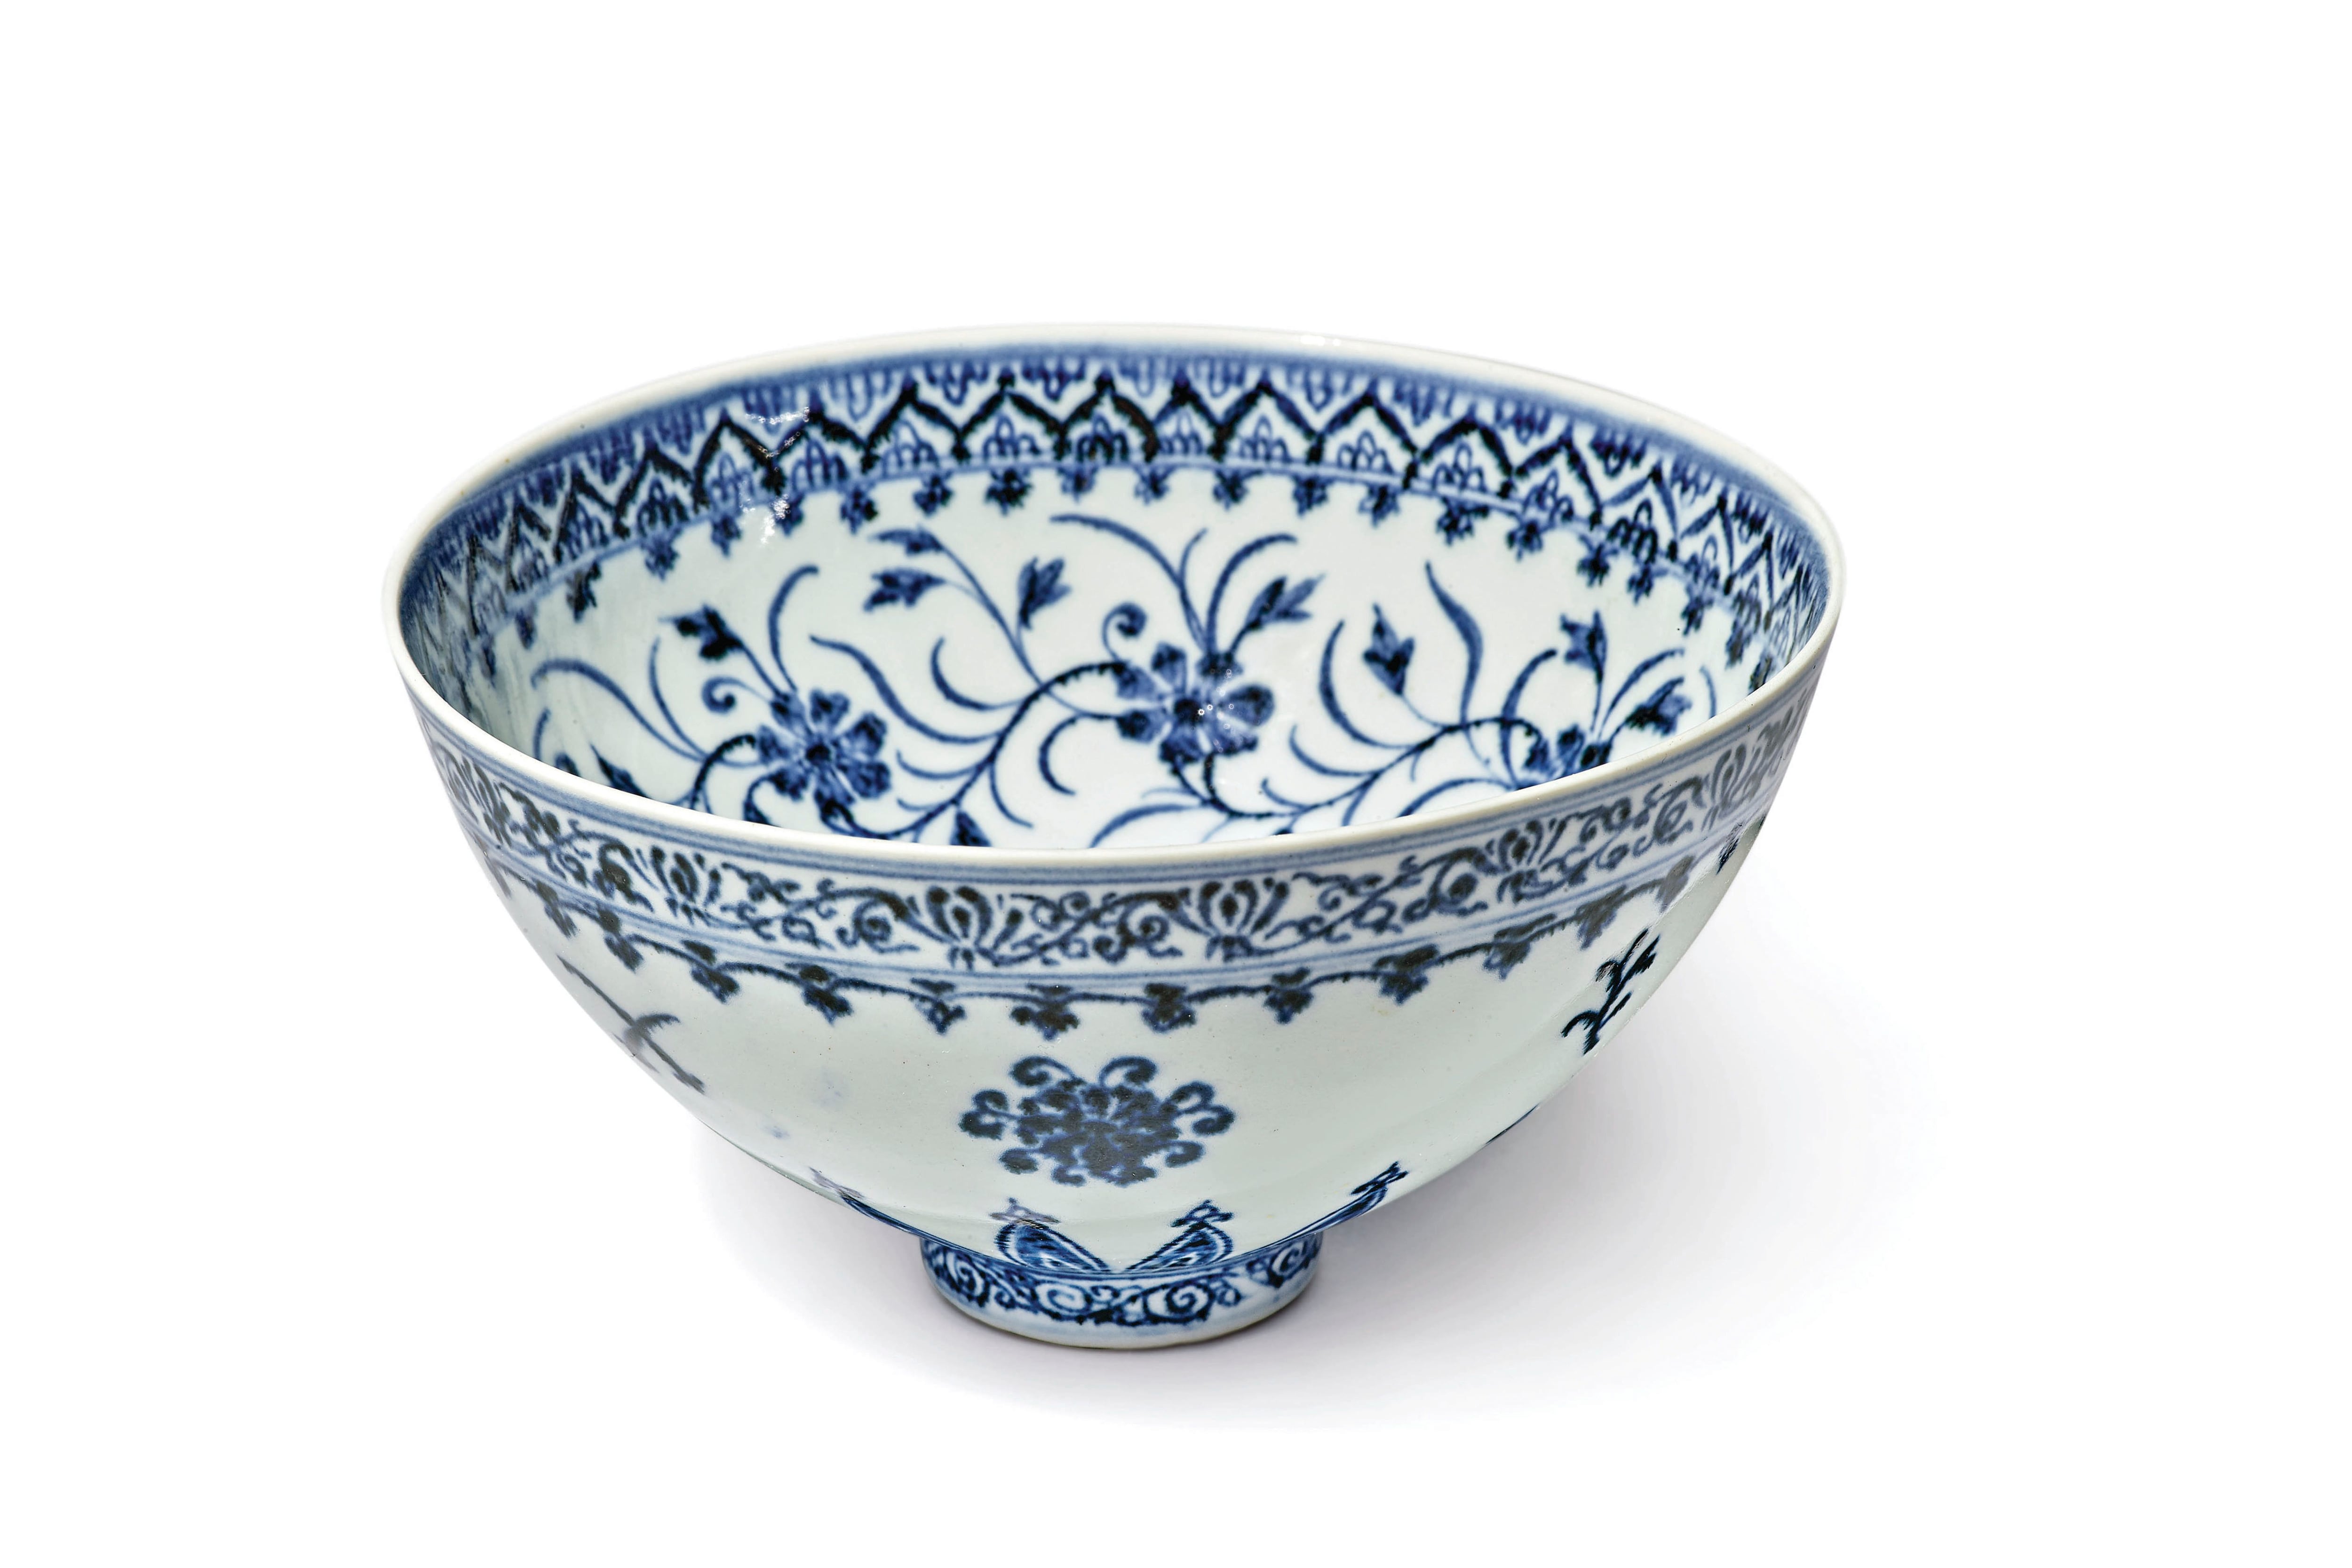 15th century bowl found at yard sale sells for $722,000